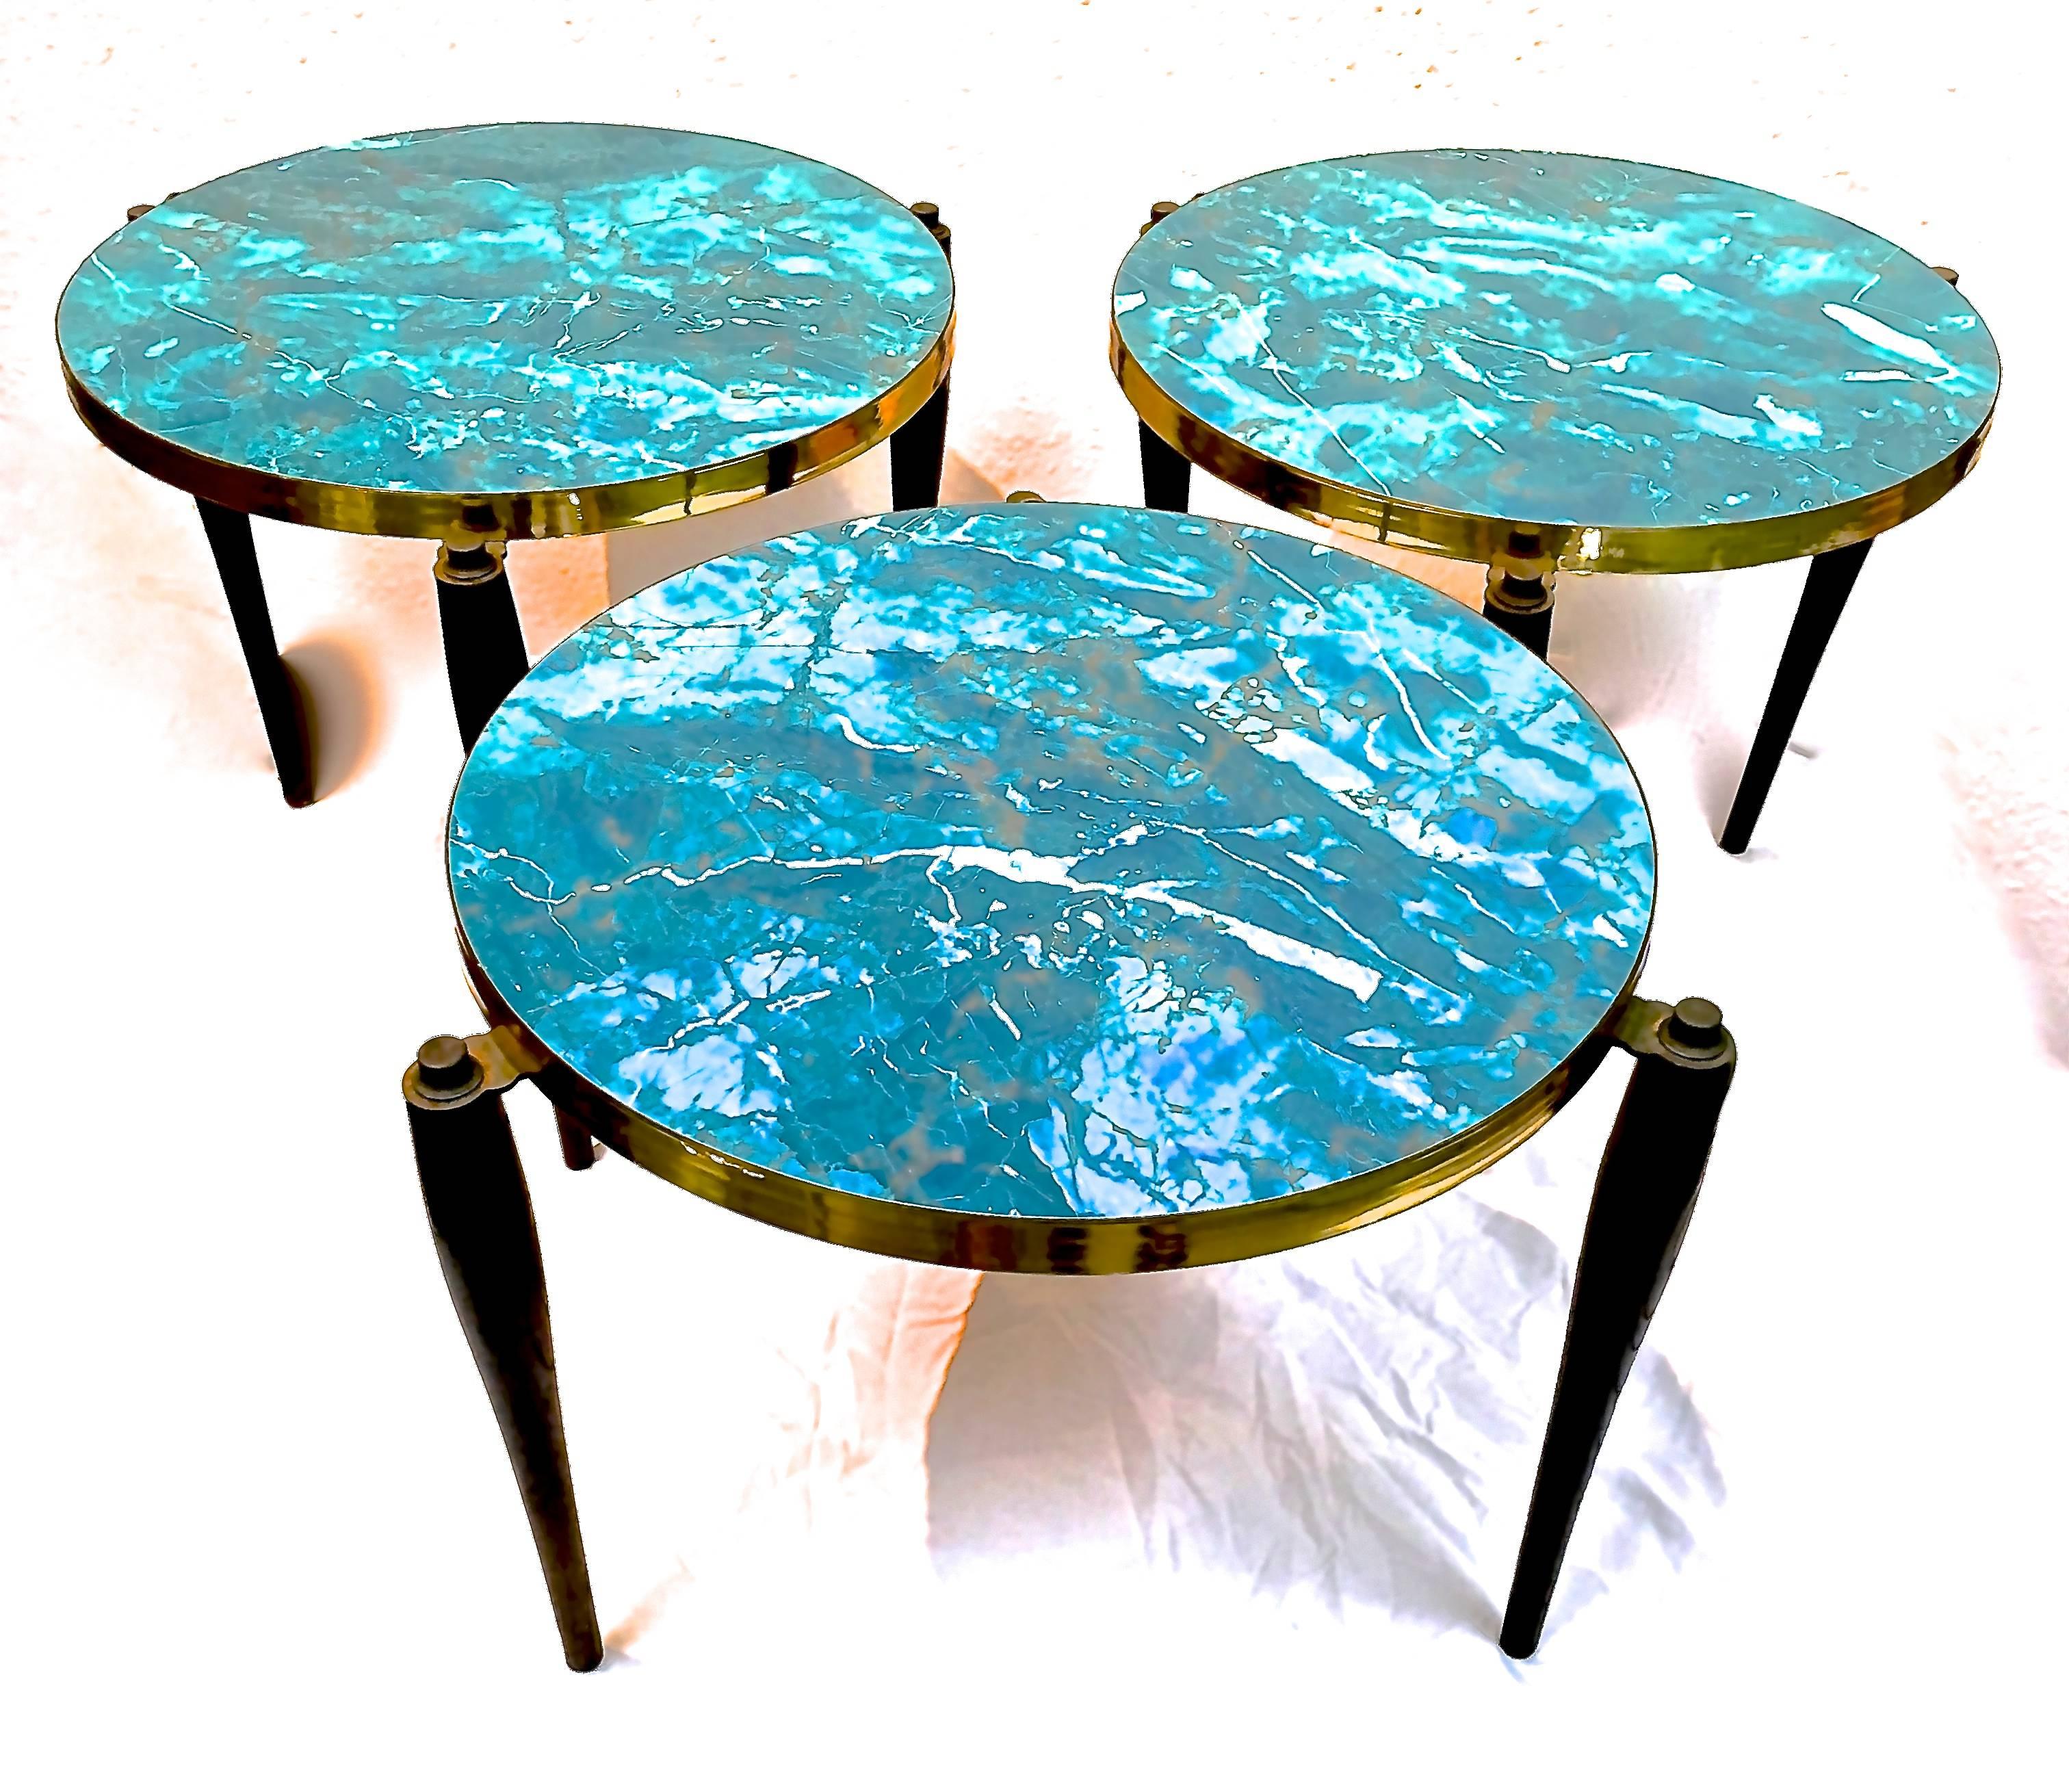 Mid-Century Modern 1950s Stacking Tables in Aqua Laminate with Brass Details